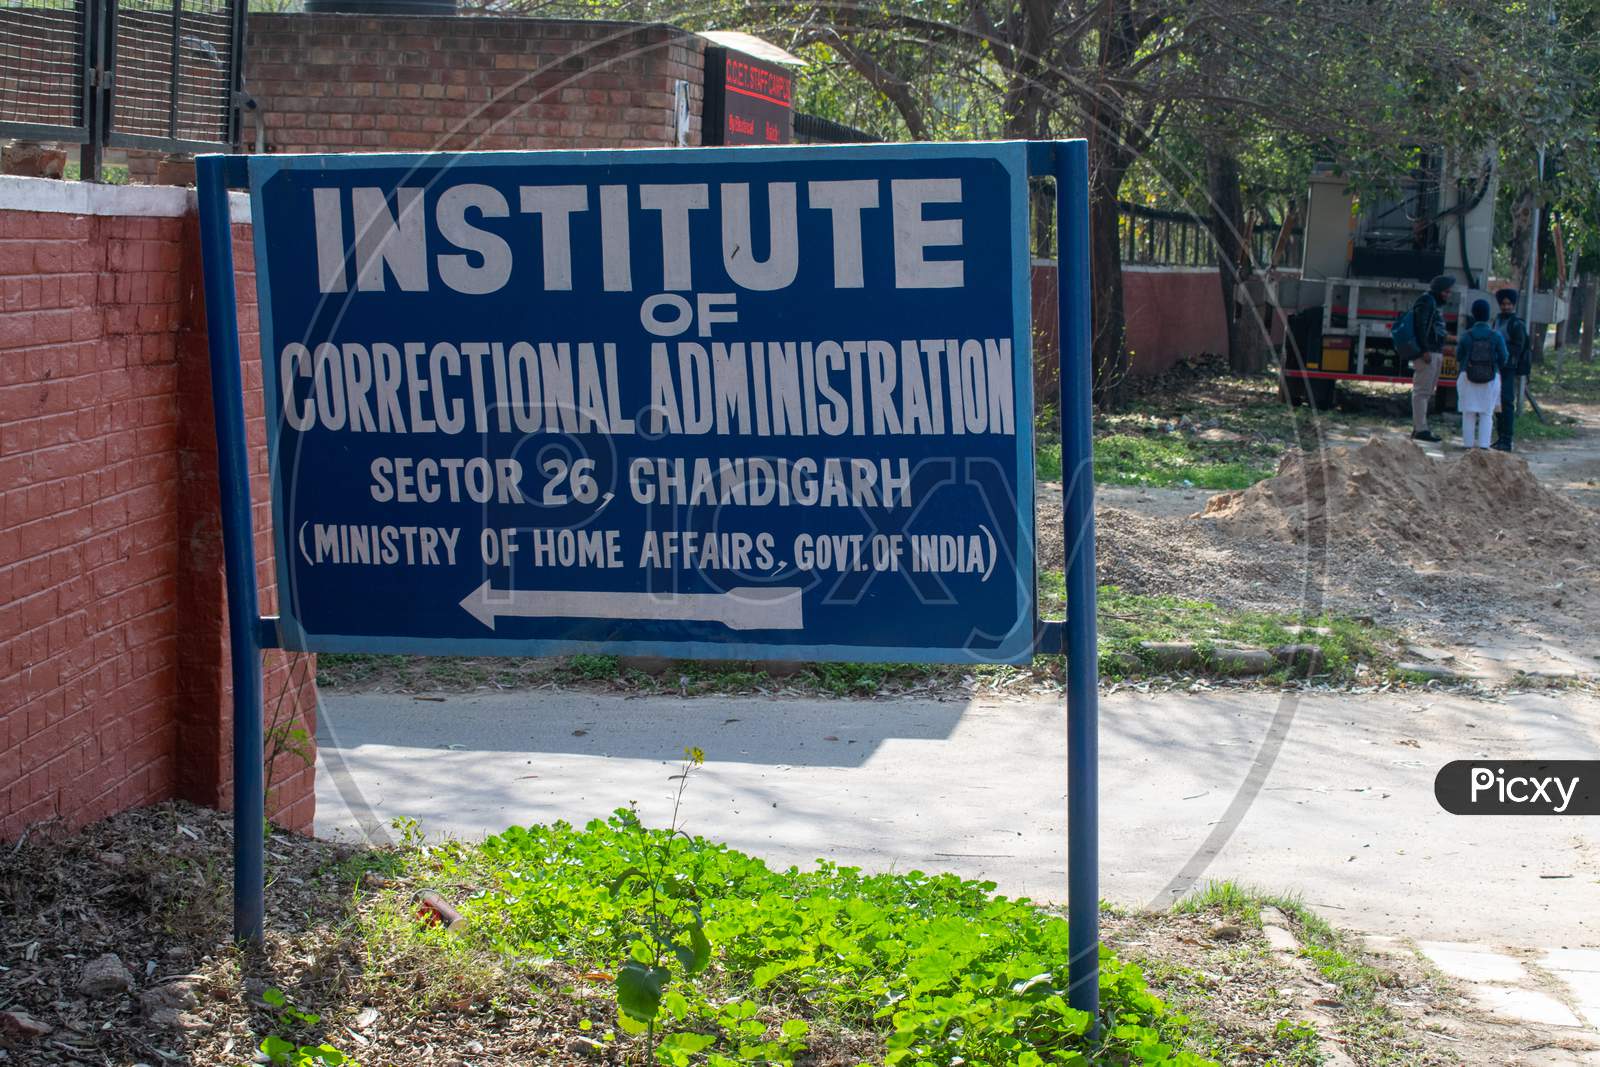 Institute of Correctional Administration